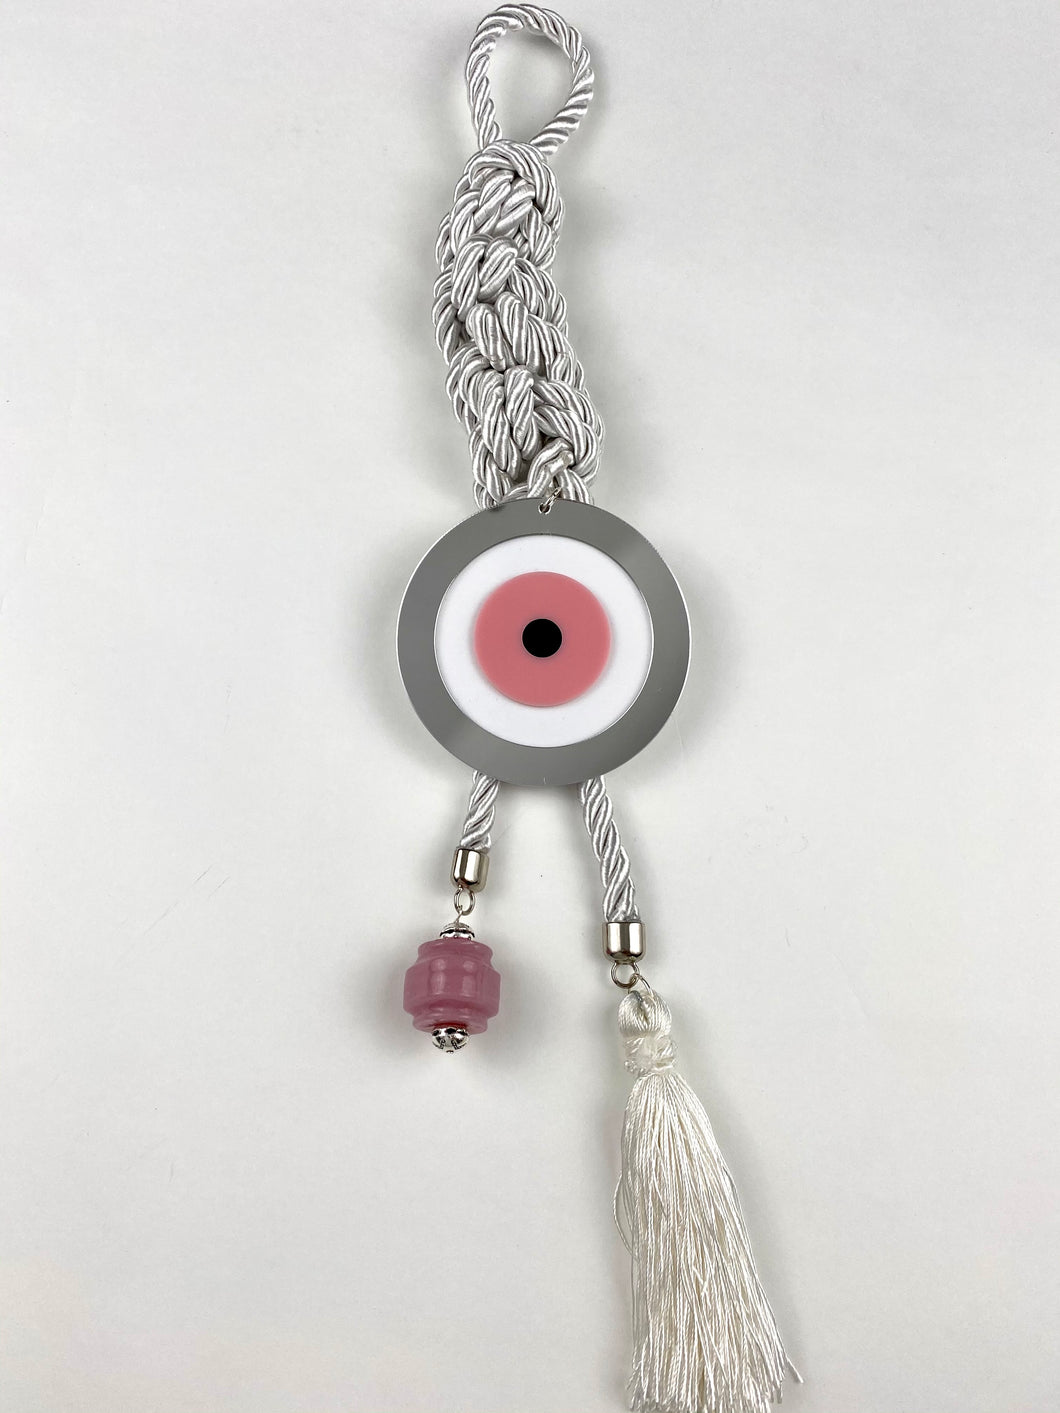 Gouri 20208 White Pearl Cord, large Acrylic Evil Eye, tassel and large Marble Rock